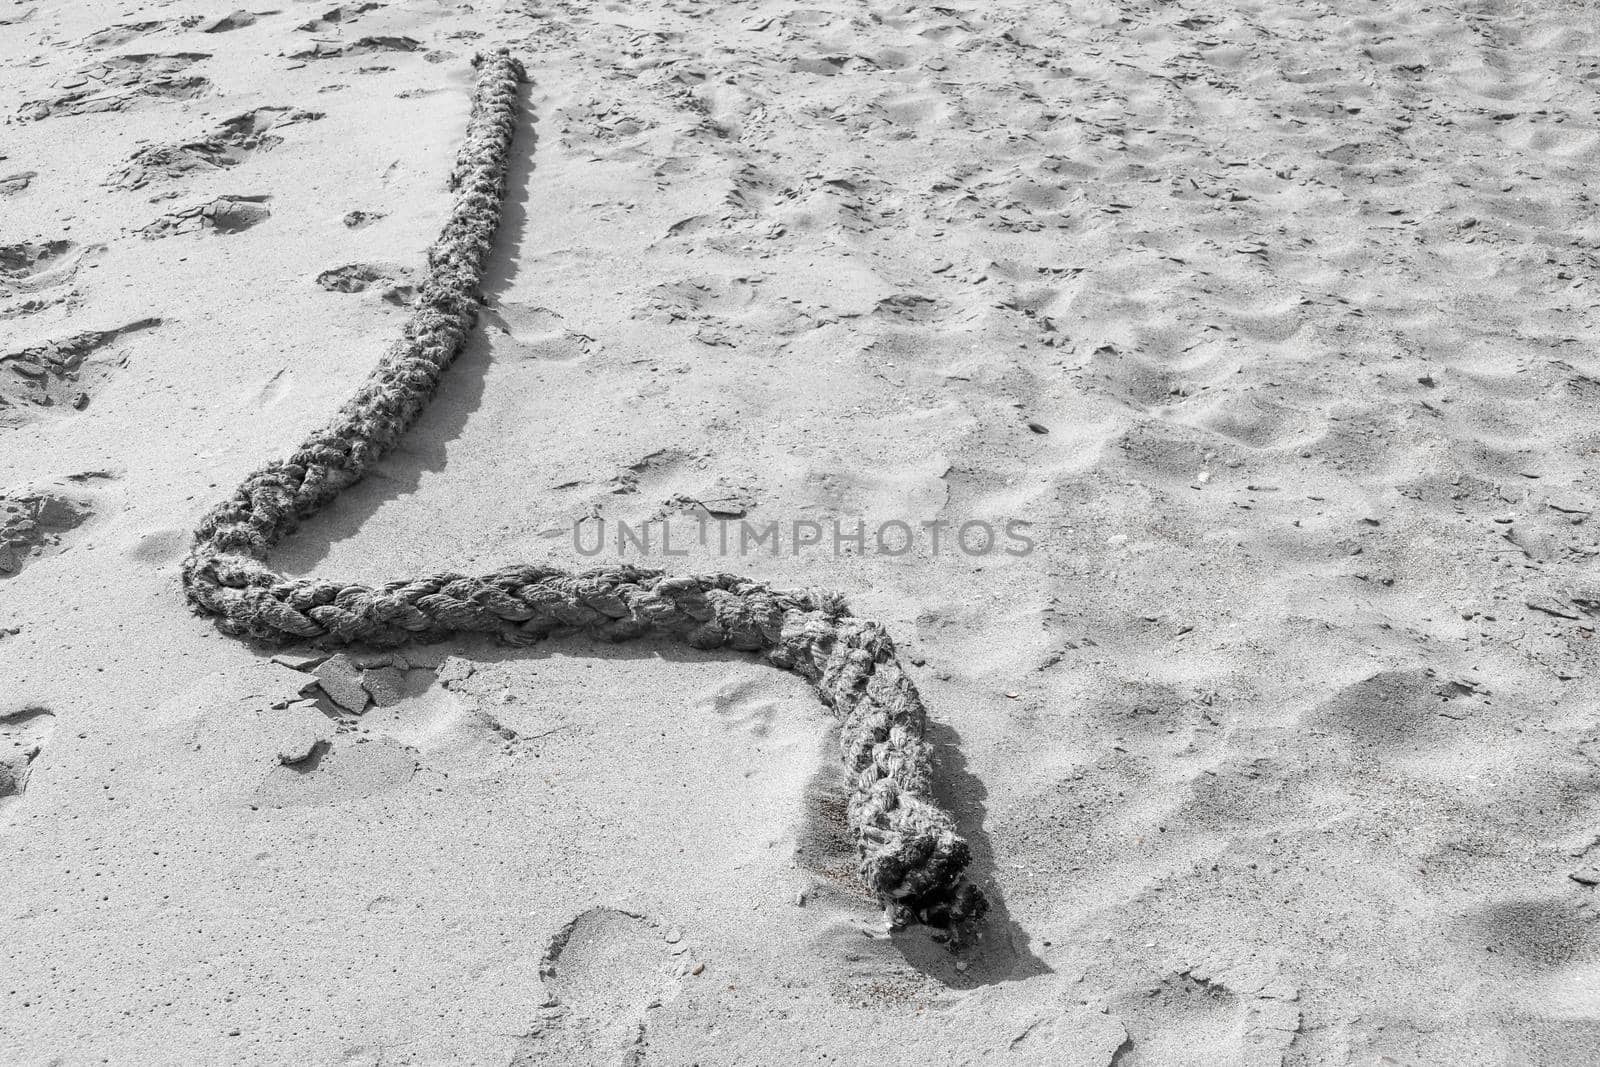 a piece of rope lying on the beach dune sand by roman112007